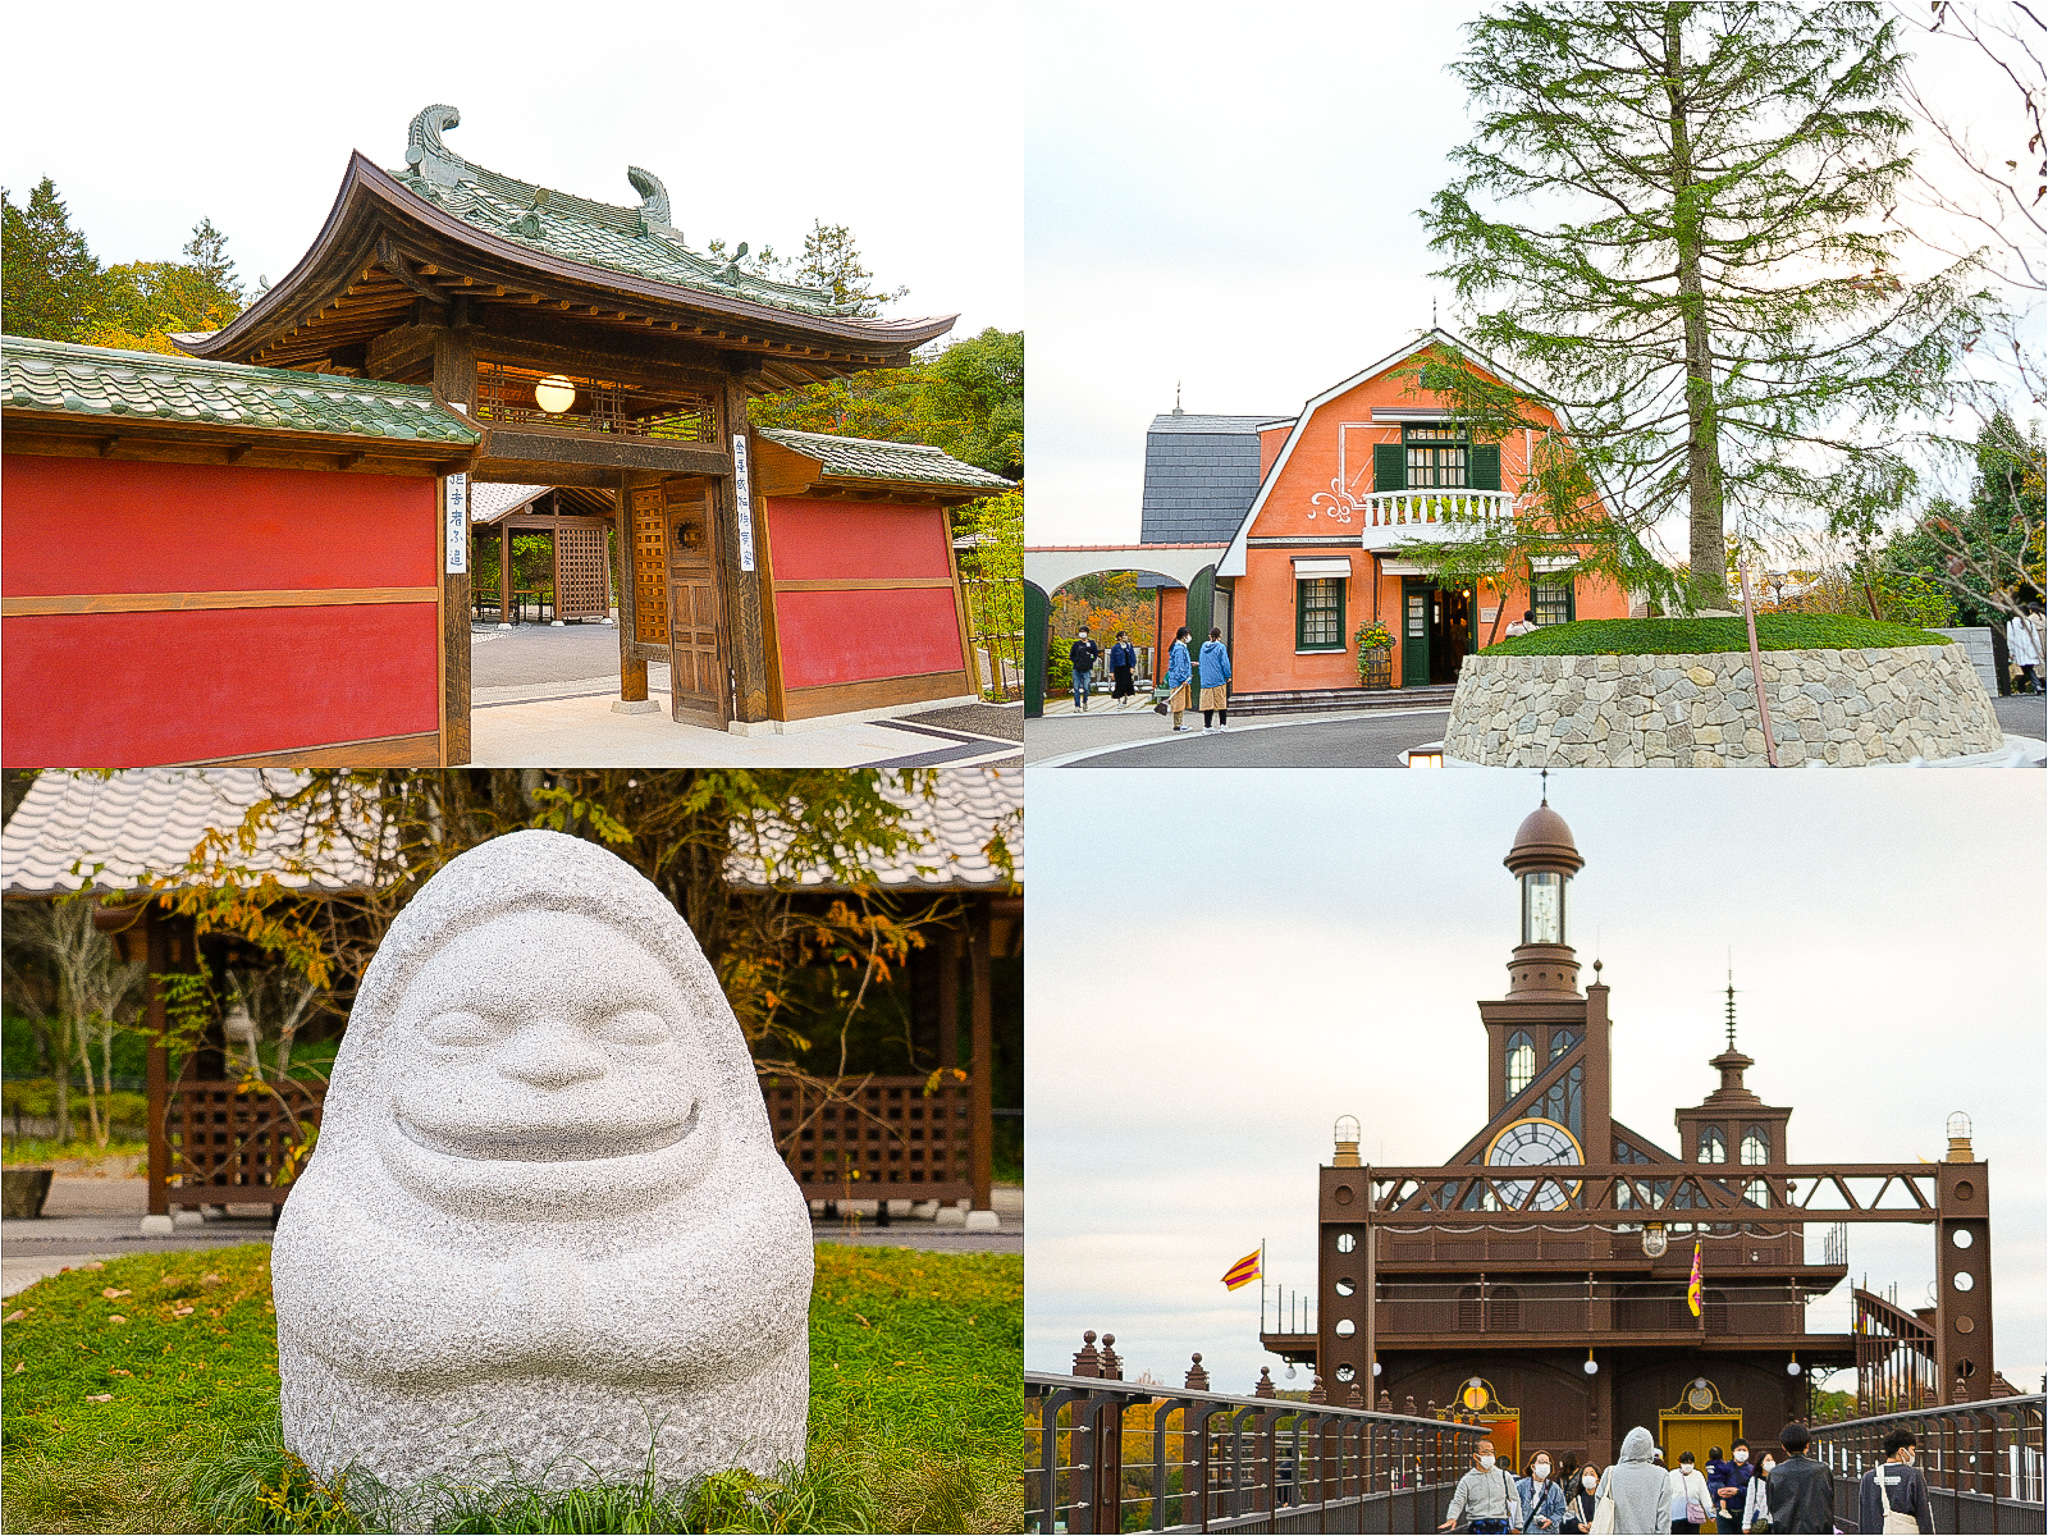 You Can Enjoy without a Ticket! Summary of Free Areas in Ghibli Park